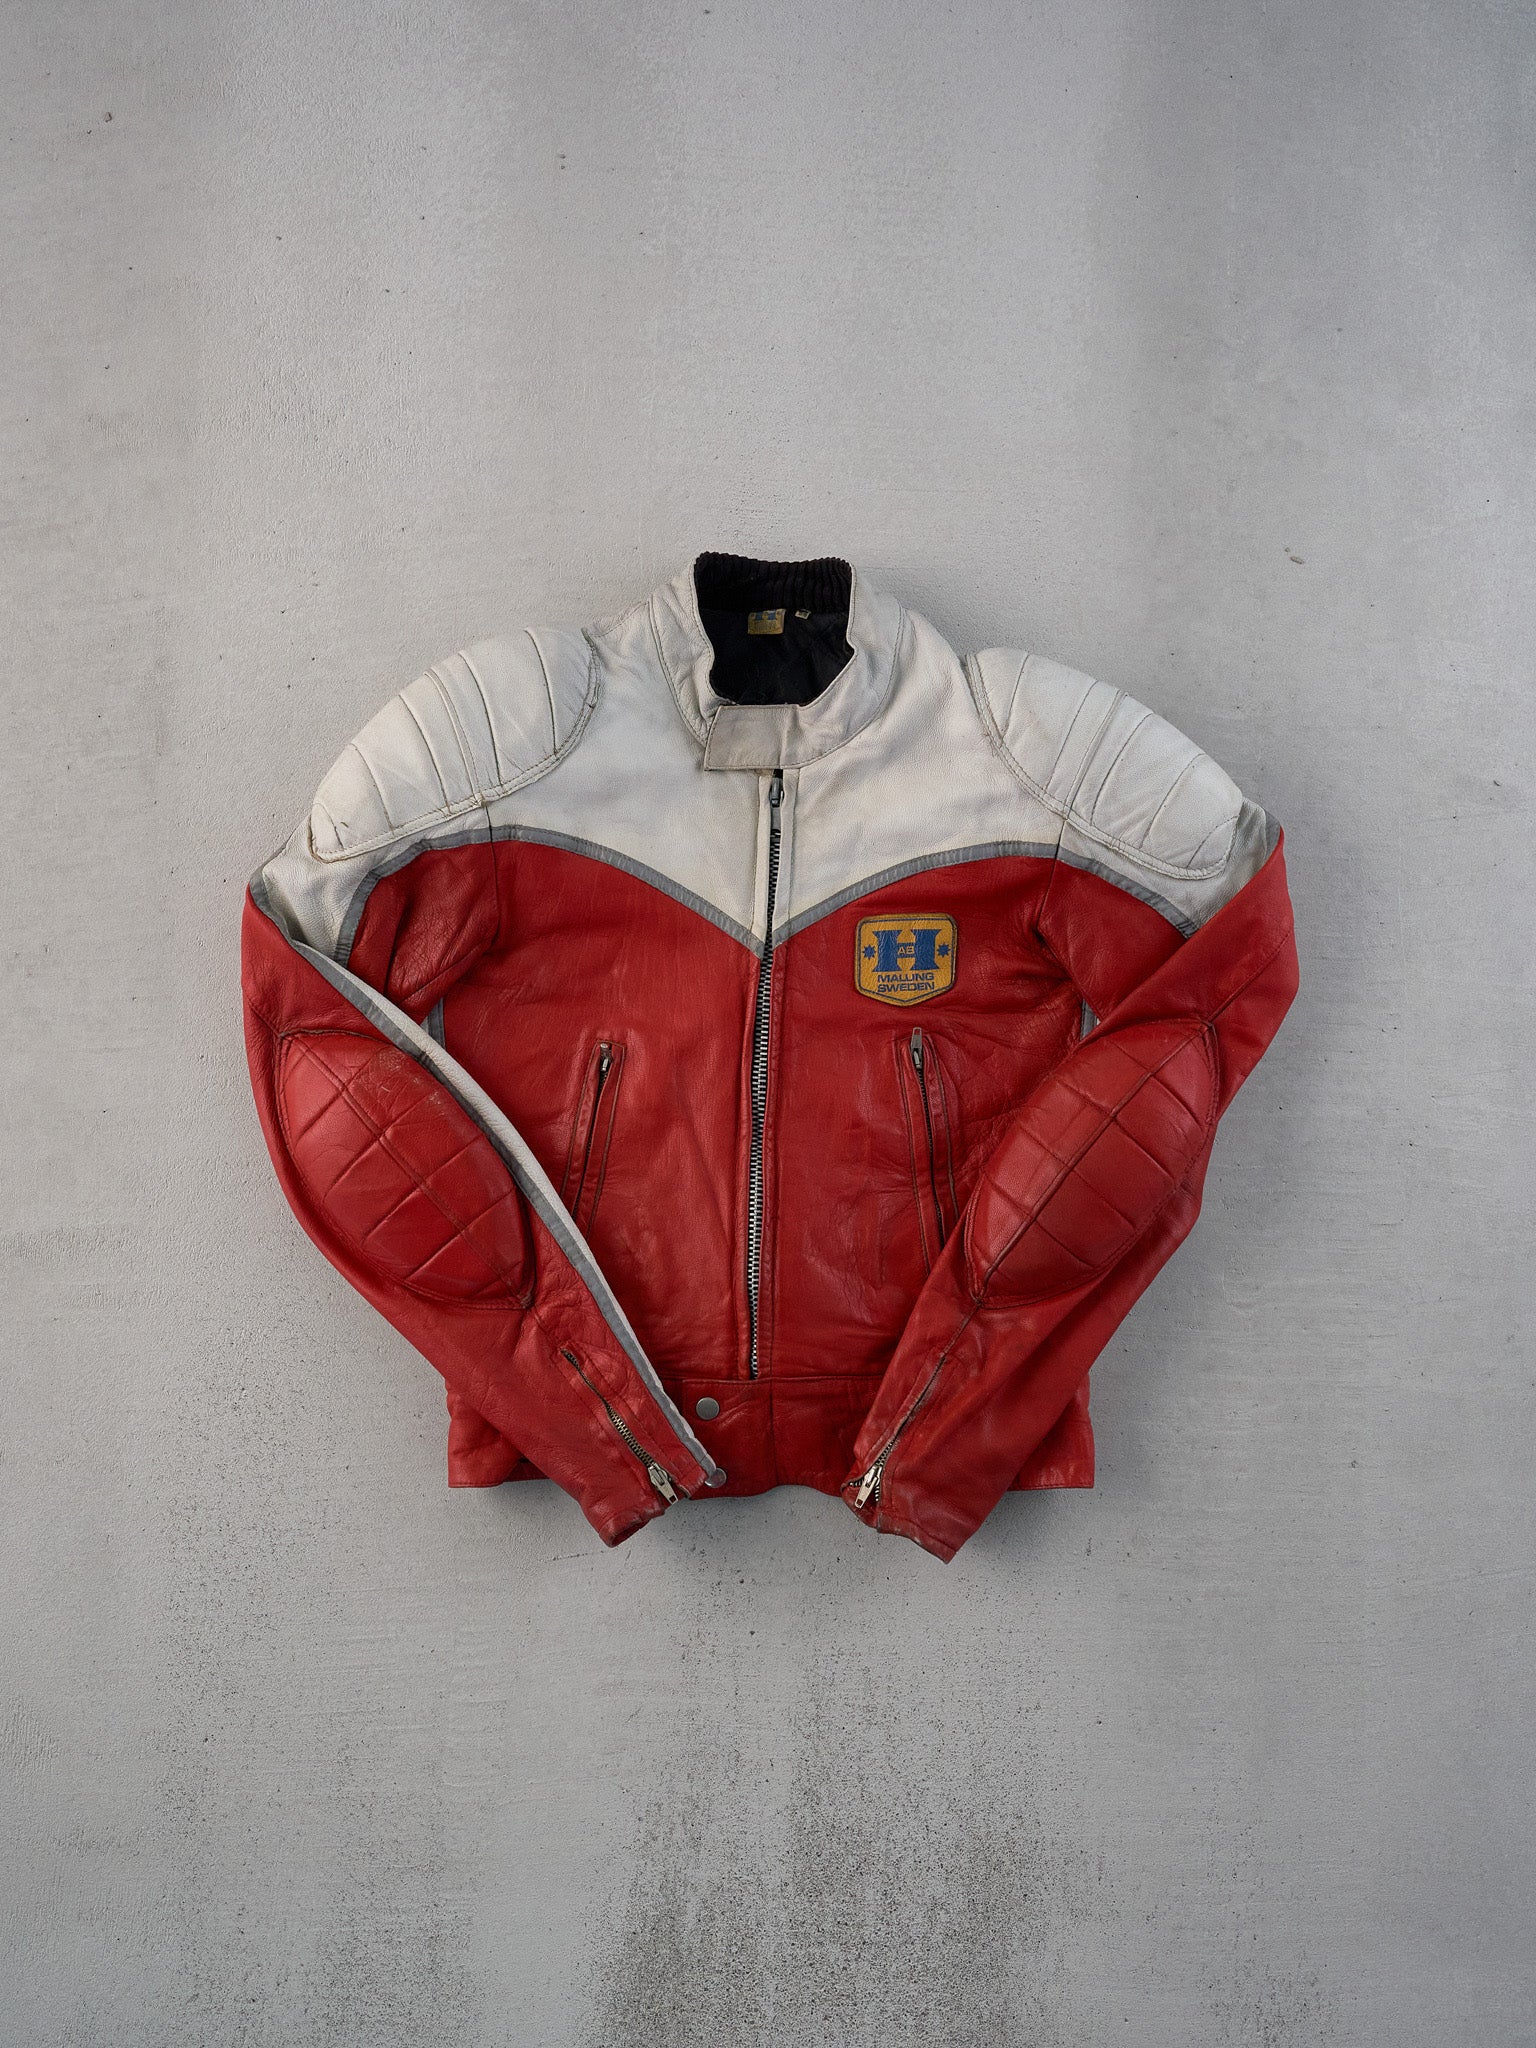 Vintage 70s Red and White Malung Sweden Motorcycle Leather Jacket (M)